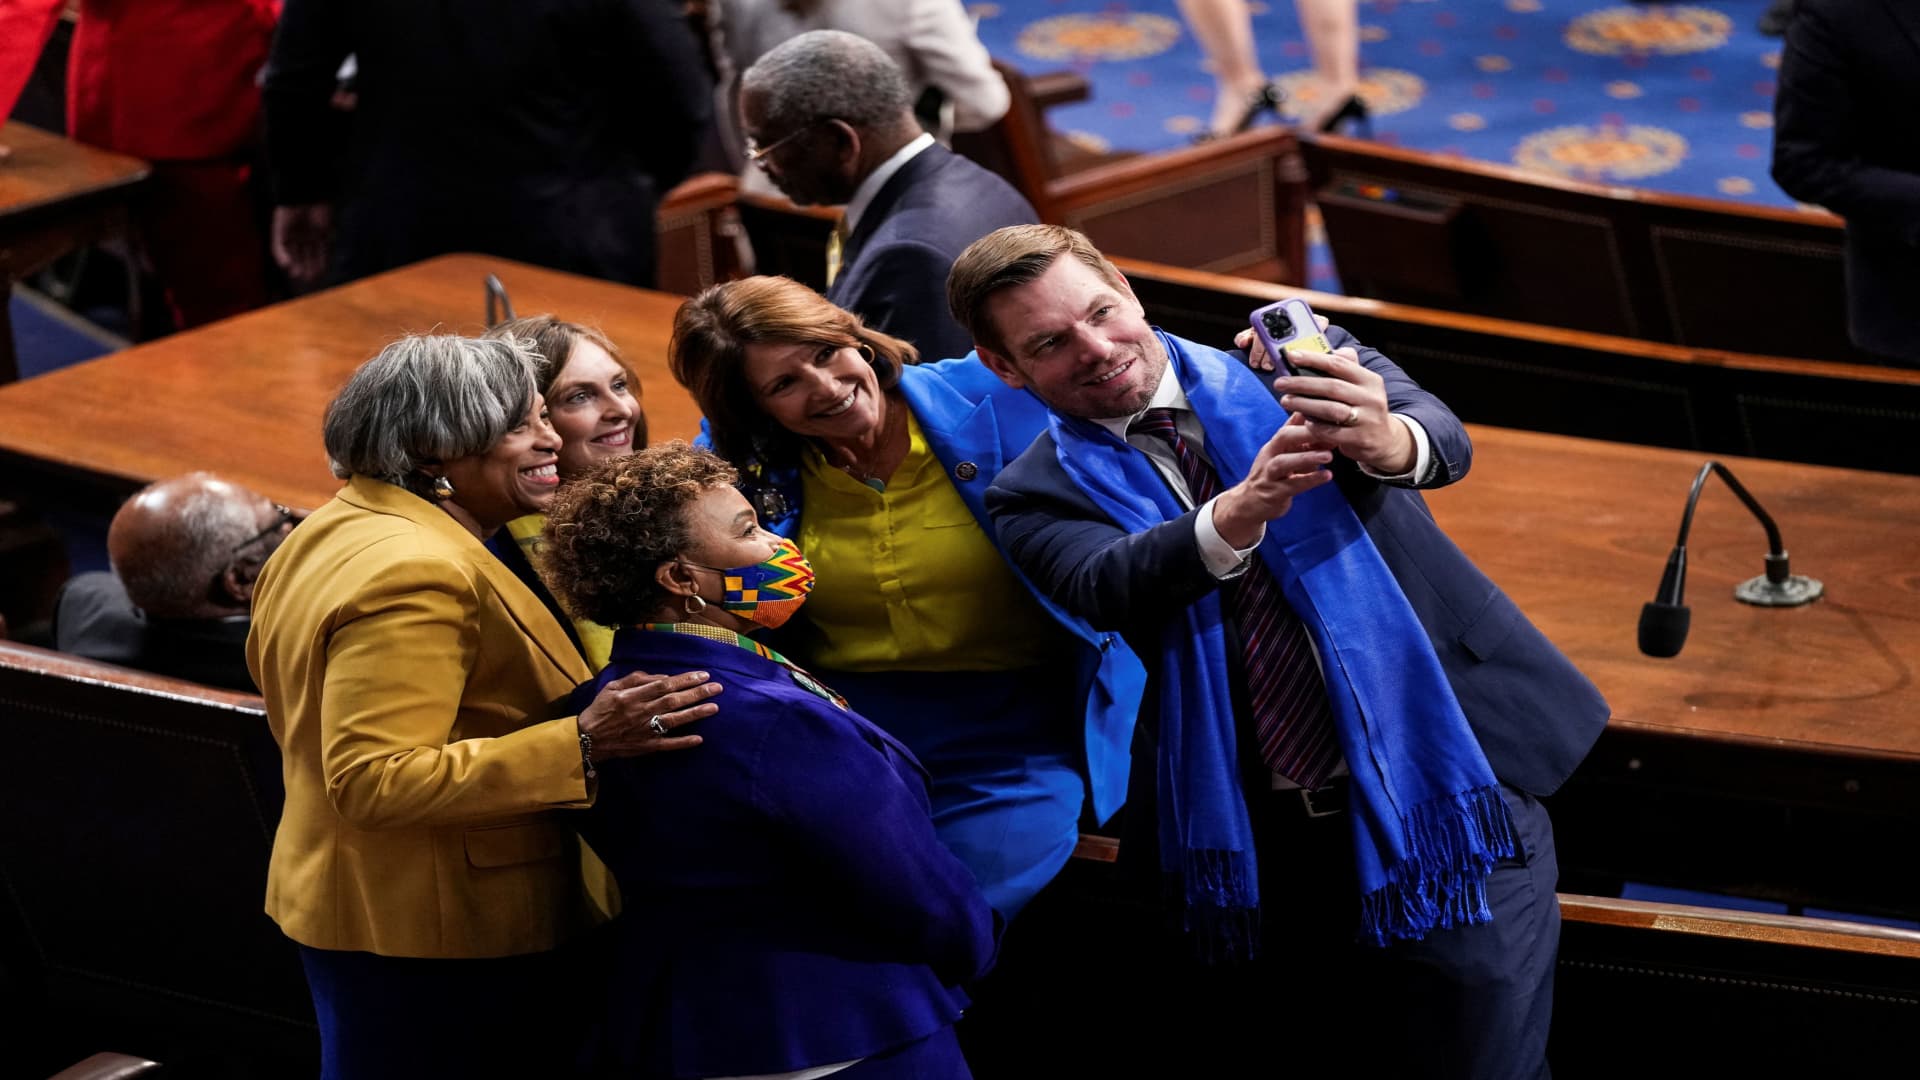 Democratic Representatives take a selfie ahead of U.S. President Joe Biden's State of the Union address during a joint session of Congress in the U.S. Capitol's House Chamber March 1, 2022 in Washington, U.S.